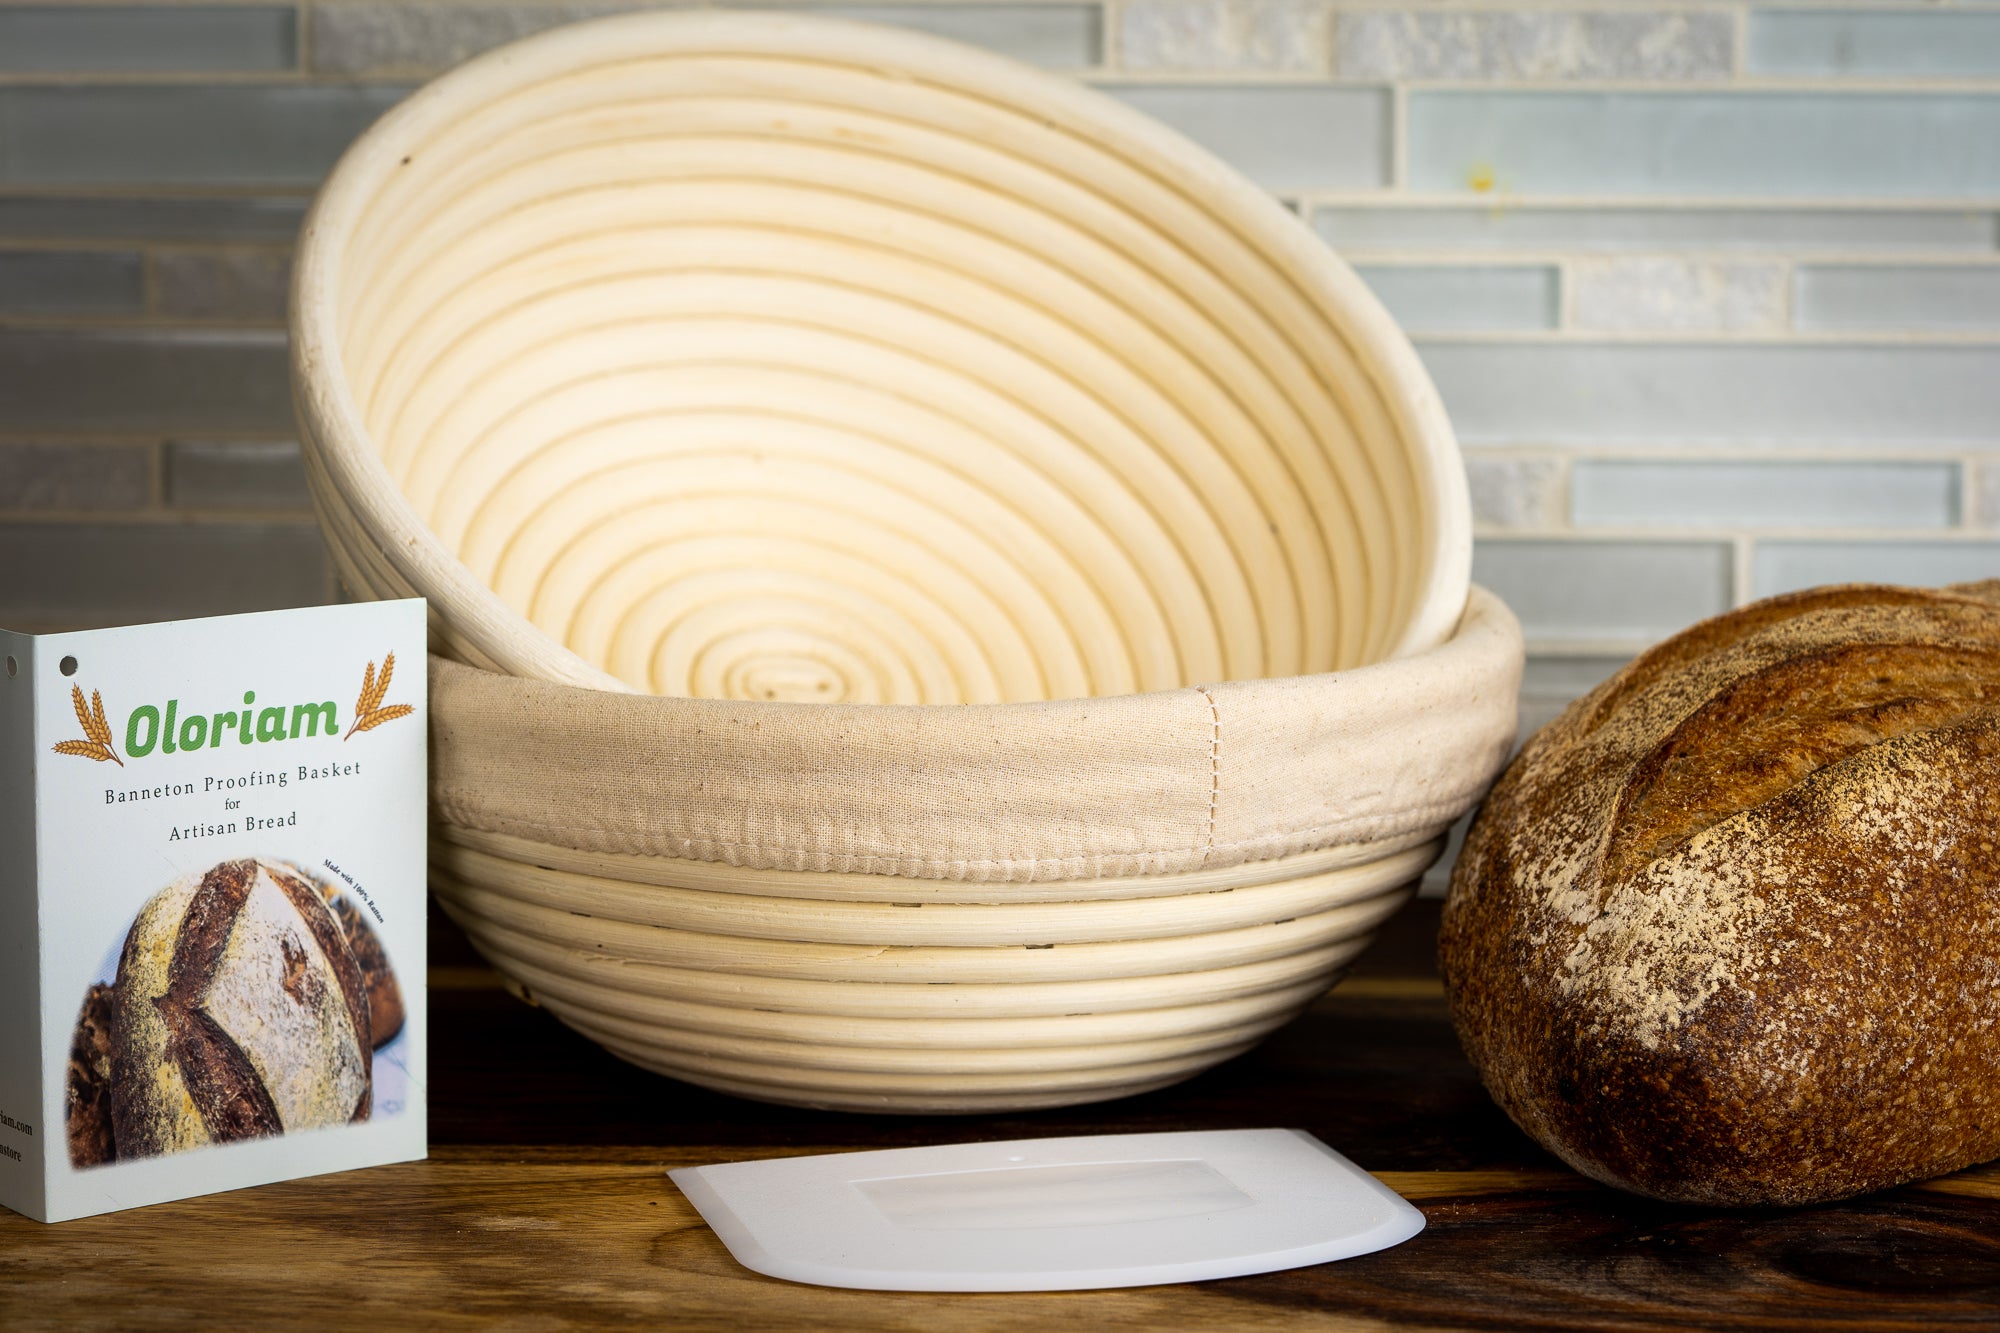 Vollum Bread Proofing Basket Banneton Baking Supplies for Beginners & Professional Bakers Handwoven Rattan Cane Bread Maker with Linen for Artisan